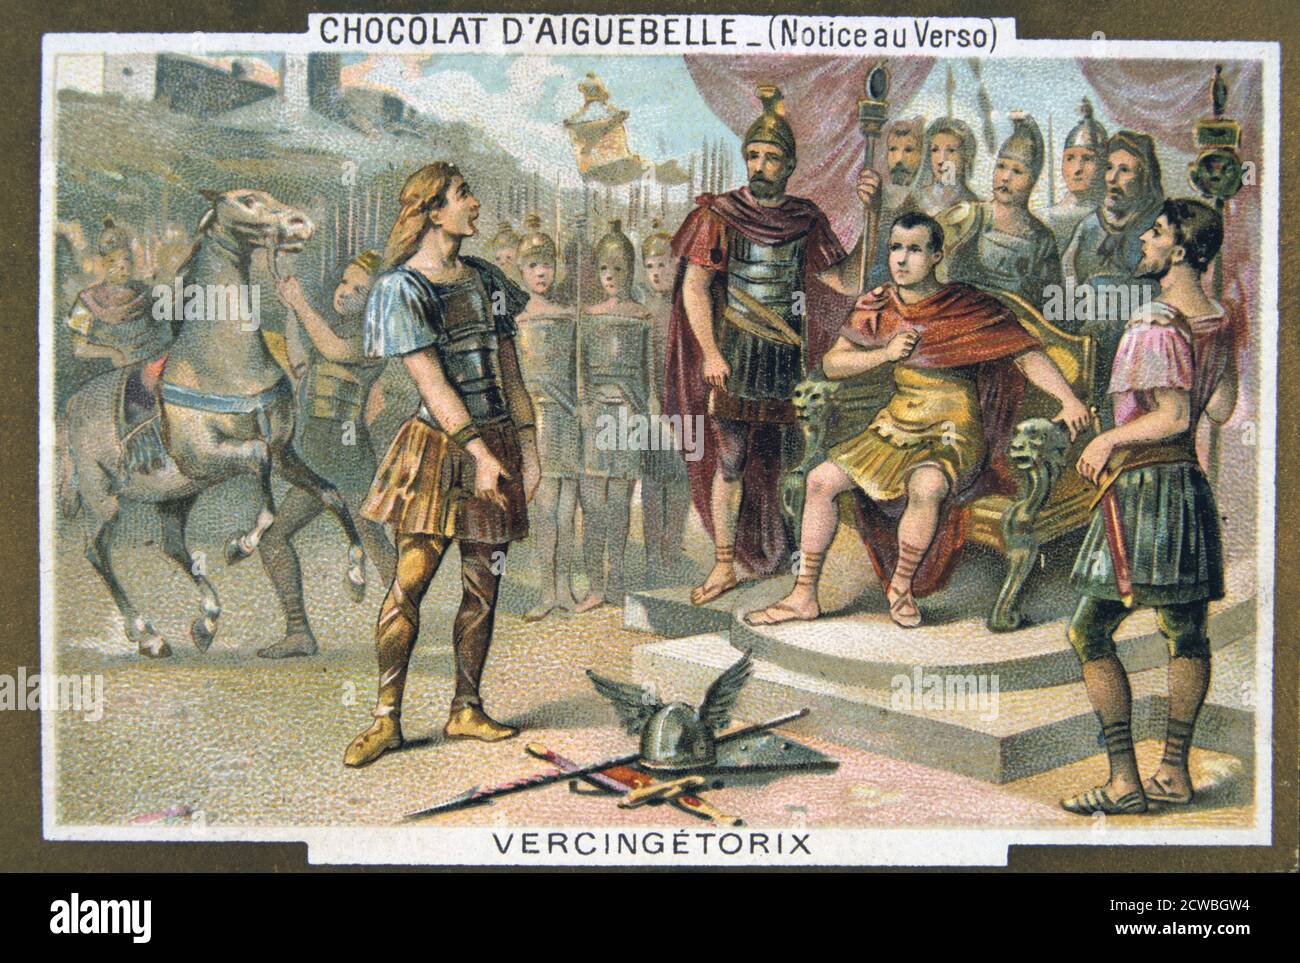 Vercingetorix surrenders to Julius Caesar, c46 BC, (19th century). Gallic chieftain Vercingetorix (died 46 BC) was defeated and captured by Julius Caesar (100-44 BC) at Alesia (near Dijon in France). Vercingetorix was taken to Rome, where he was humiliated by being paraded as evidence of Rome's greatness, and was then put to death. Card from a series produced by the chocolate factory at the Monastery of Aiguebelle. Stock Photo